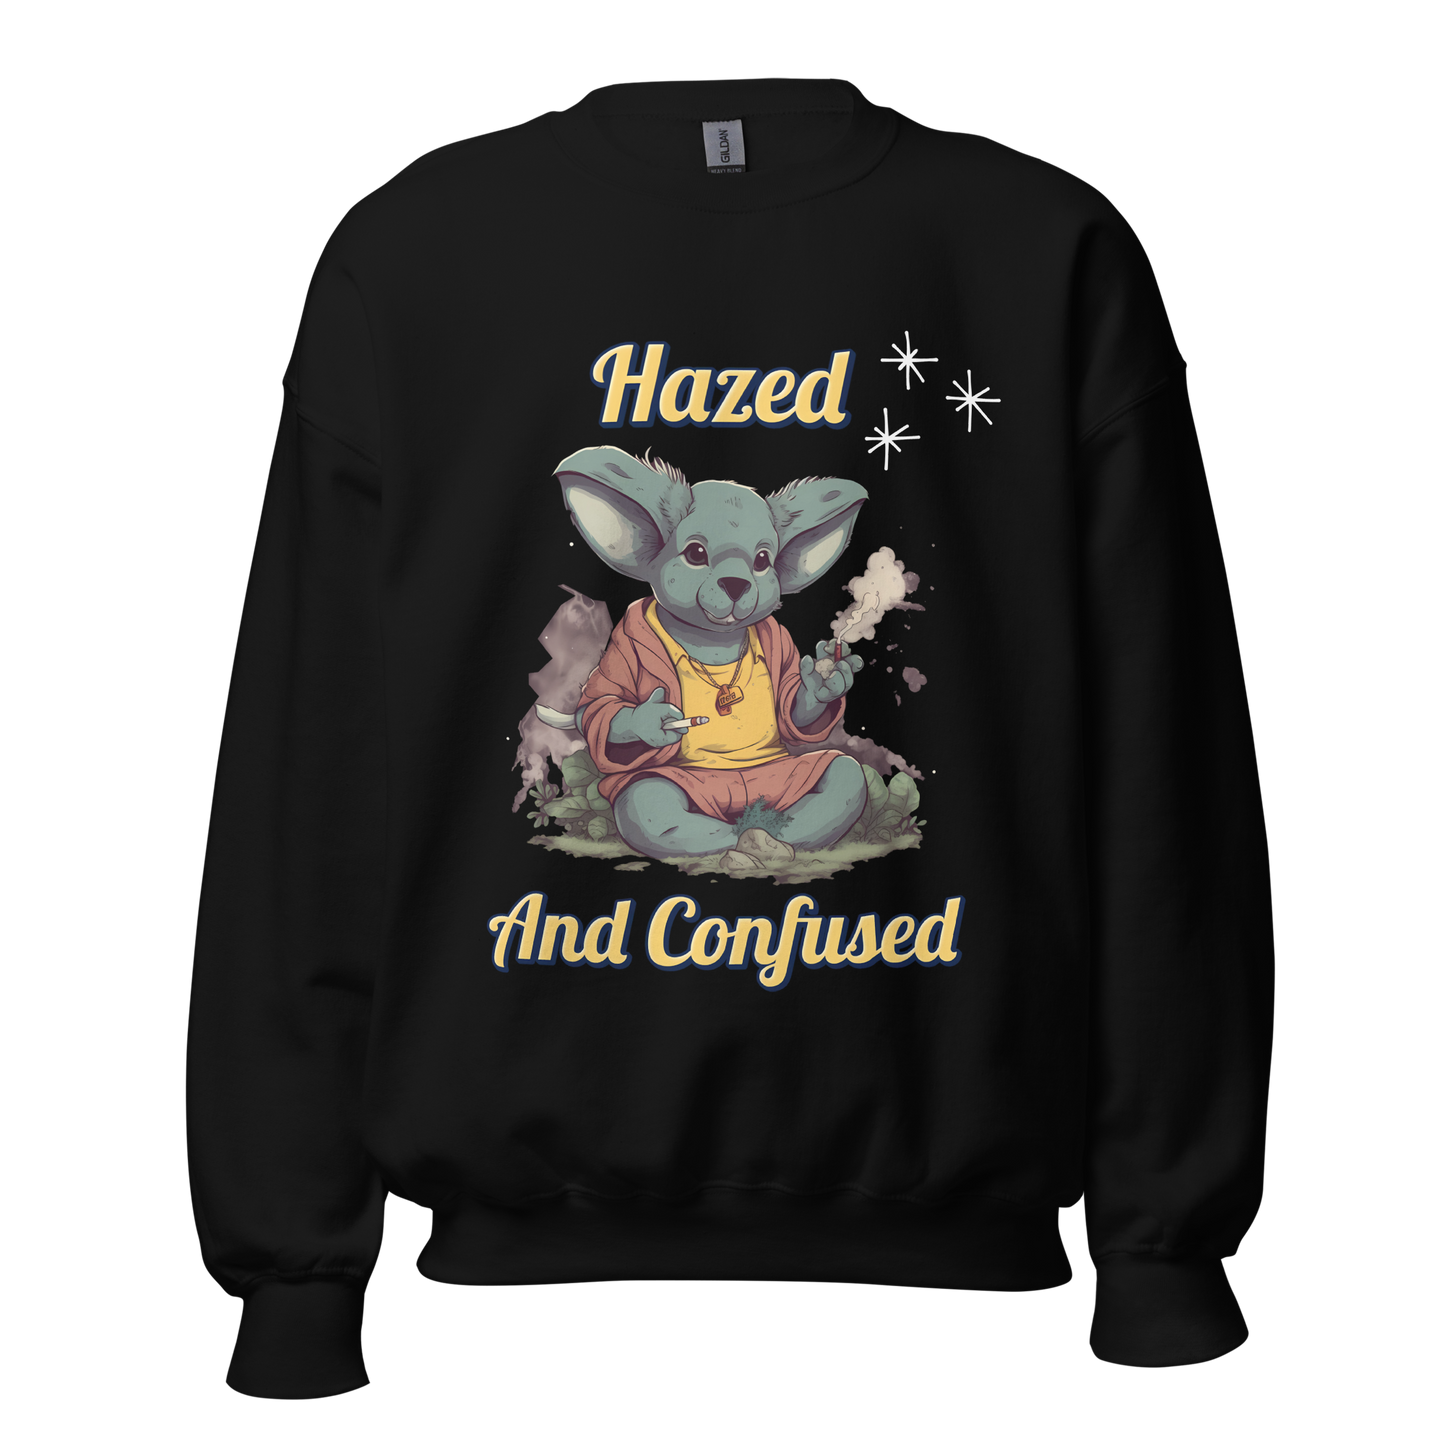 Chill Koala Vibes Graphic Sweatshirt: Stay Cozy and Laid-Back with a Stoner Twist